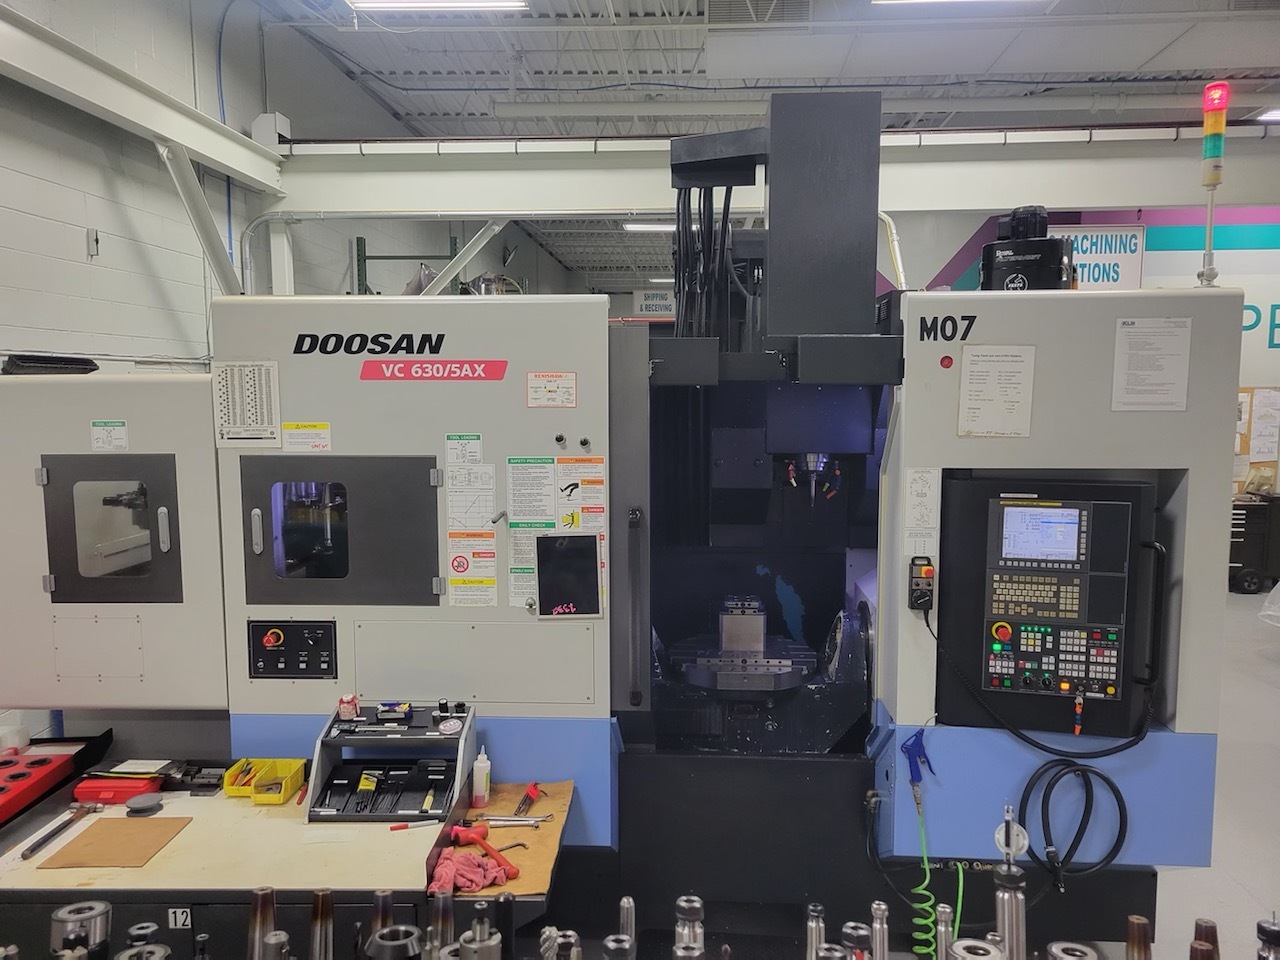 2014 DOOSAN VC 630/5AX Vertical Machining Centers (5-Axis or More) | Used Machine Hub